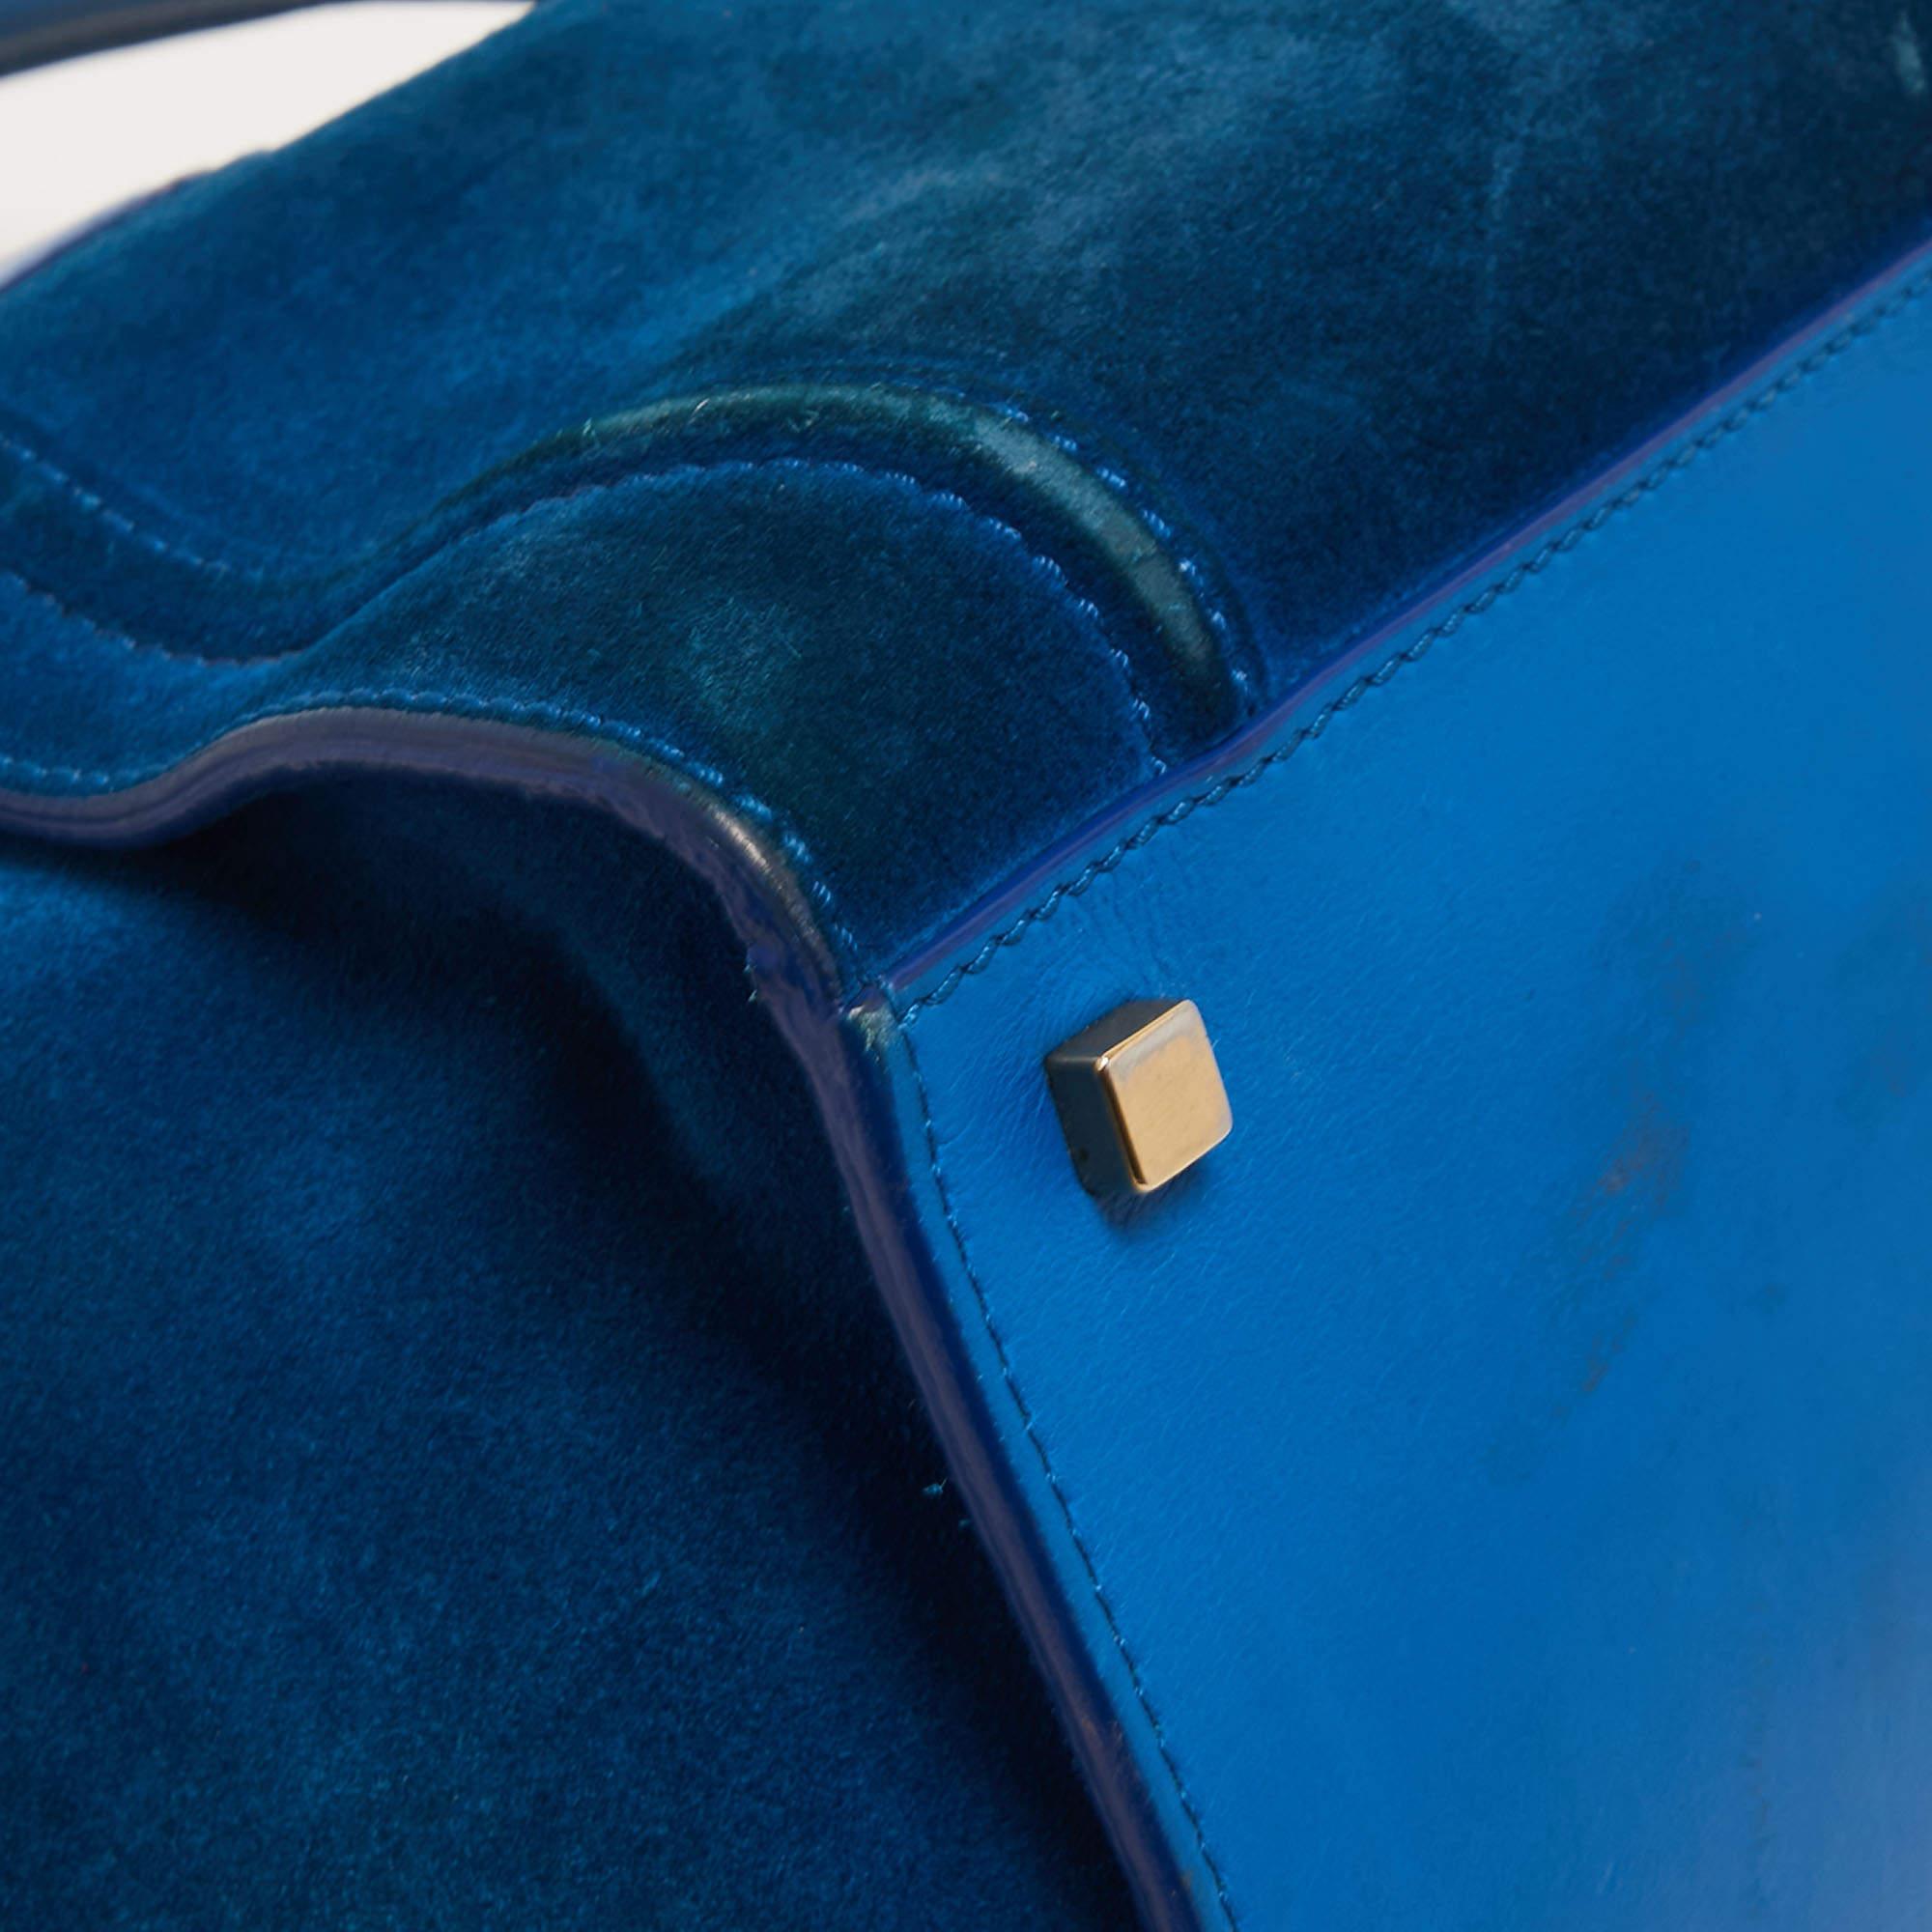 Celine released the Phantom as a newer version of their successful Luggage model. Unlike the Luggage toes, the Phantom has an open top, wider wingspans, and a braided zipper pull. We have here the one in suede. It has two top handles, a blue shade,